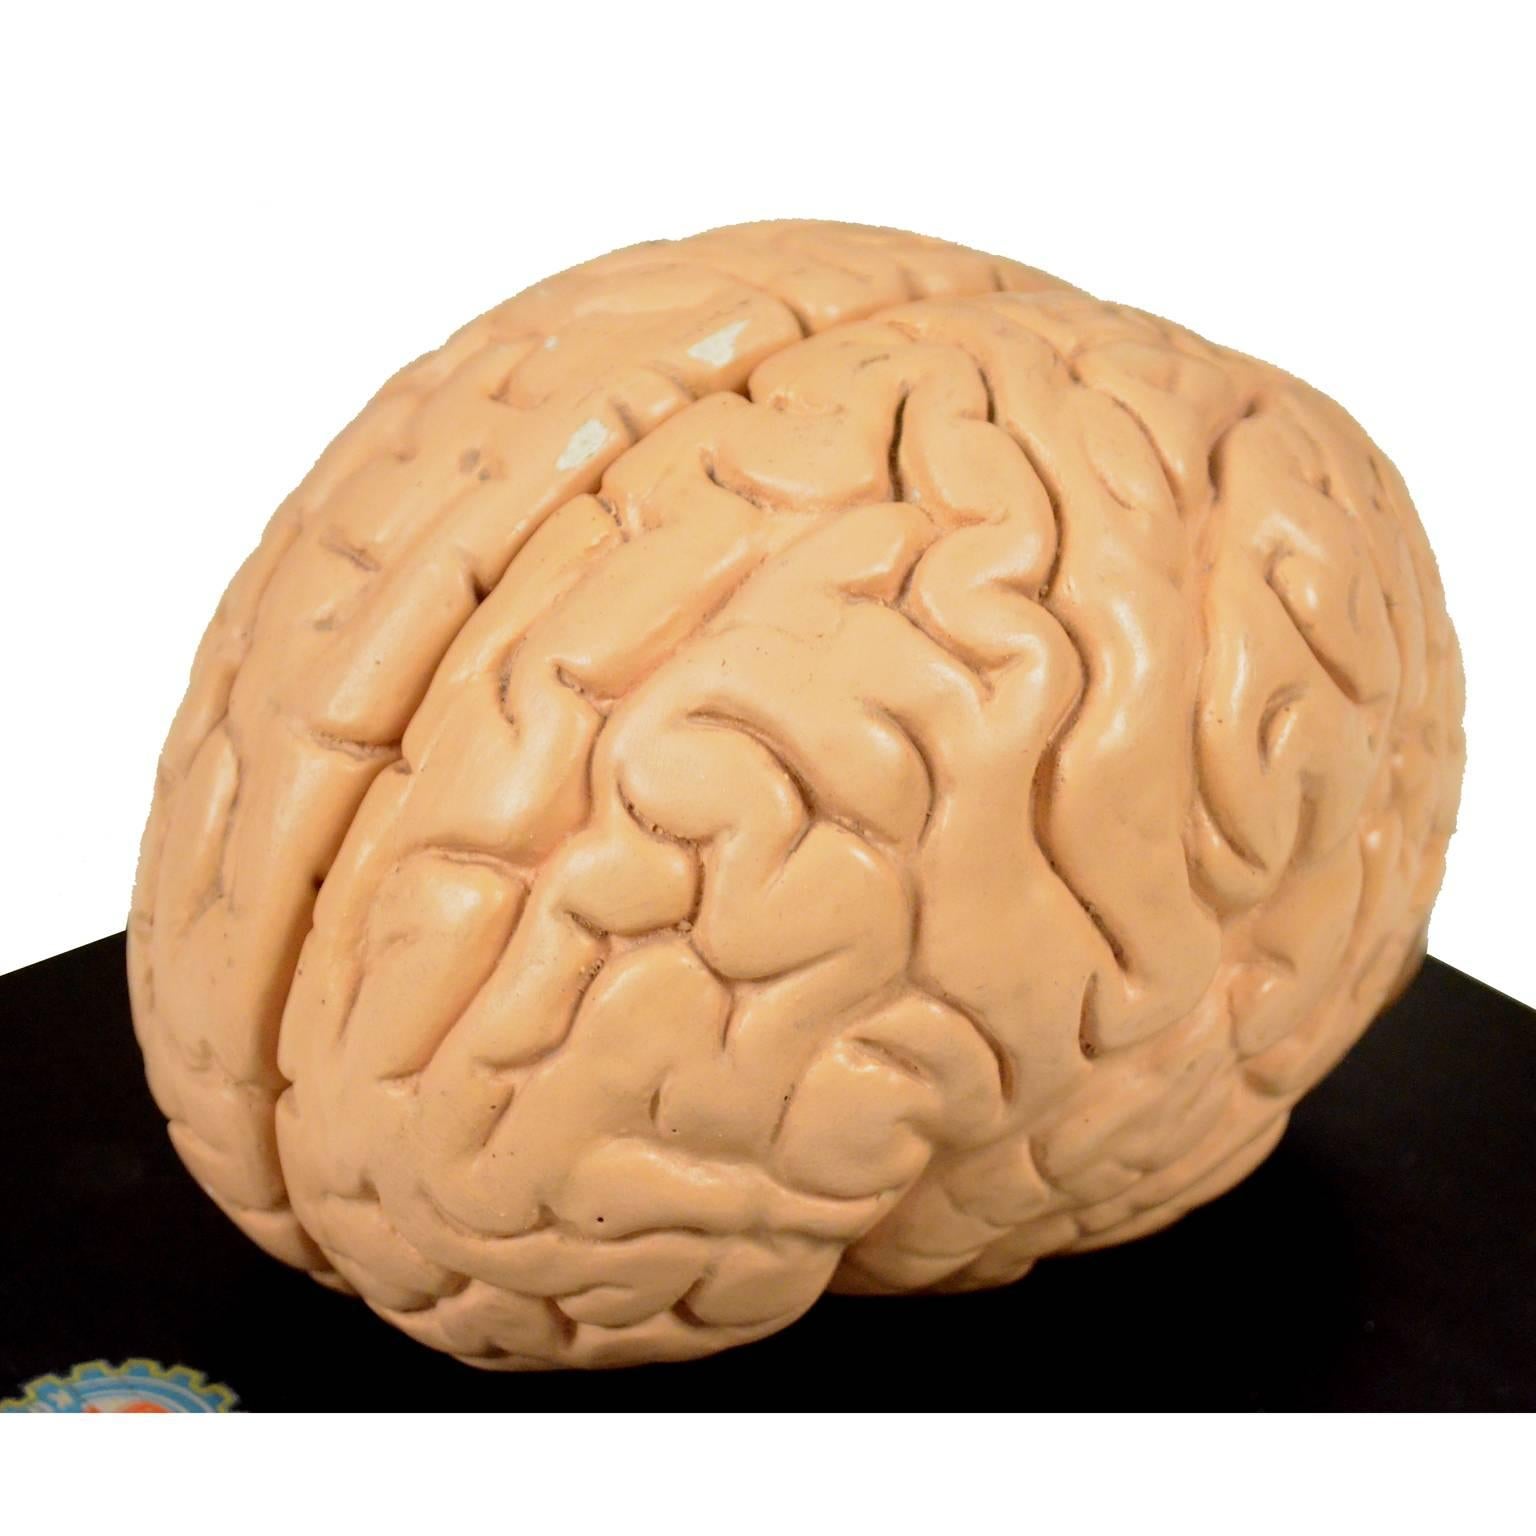 Mid-20th Century Didactic Model of Human Brain of the Early 1930s For Sale